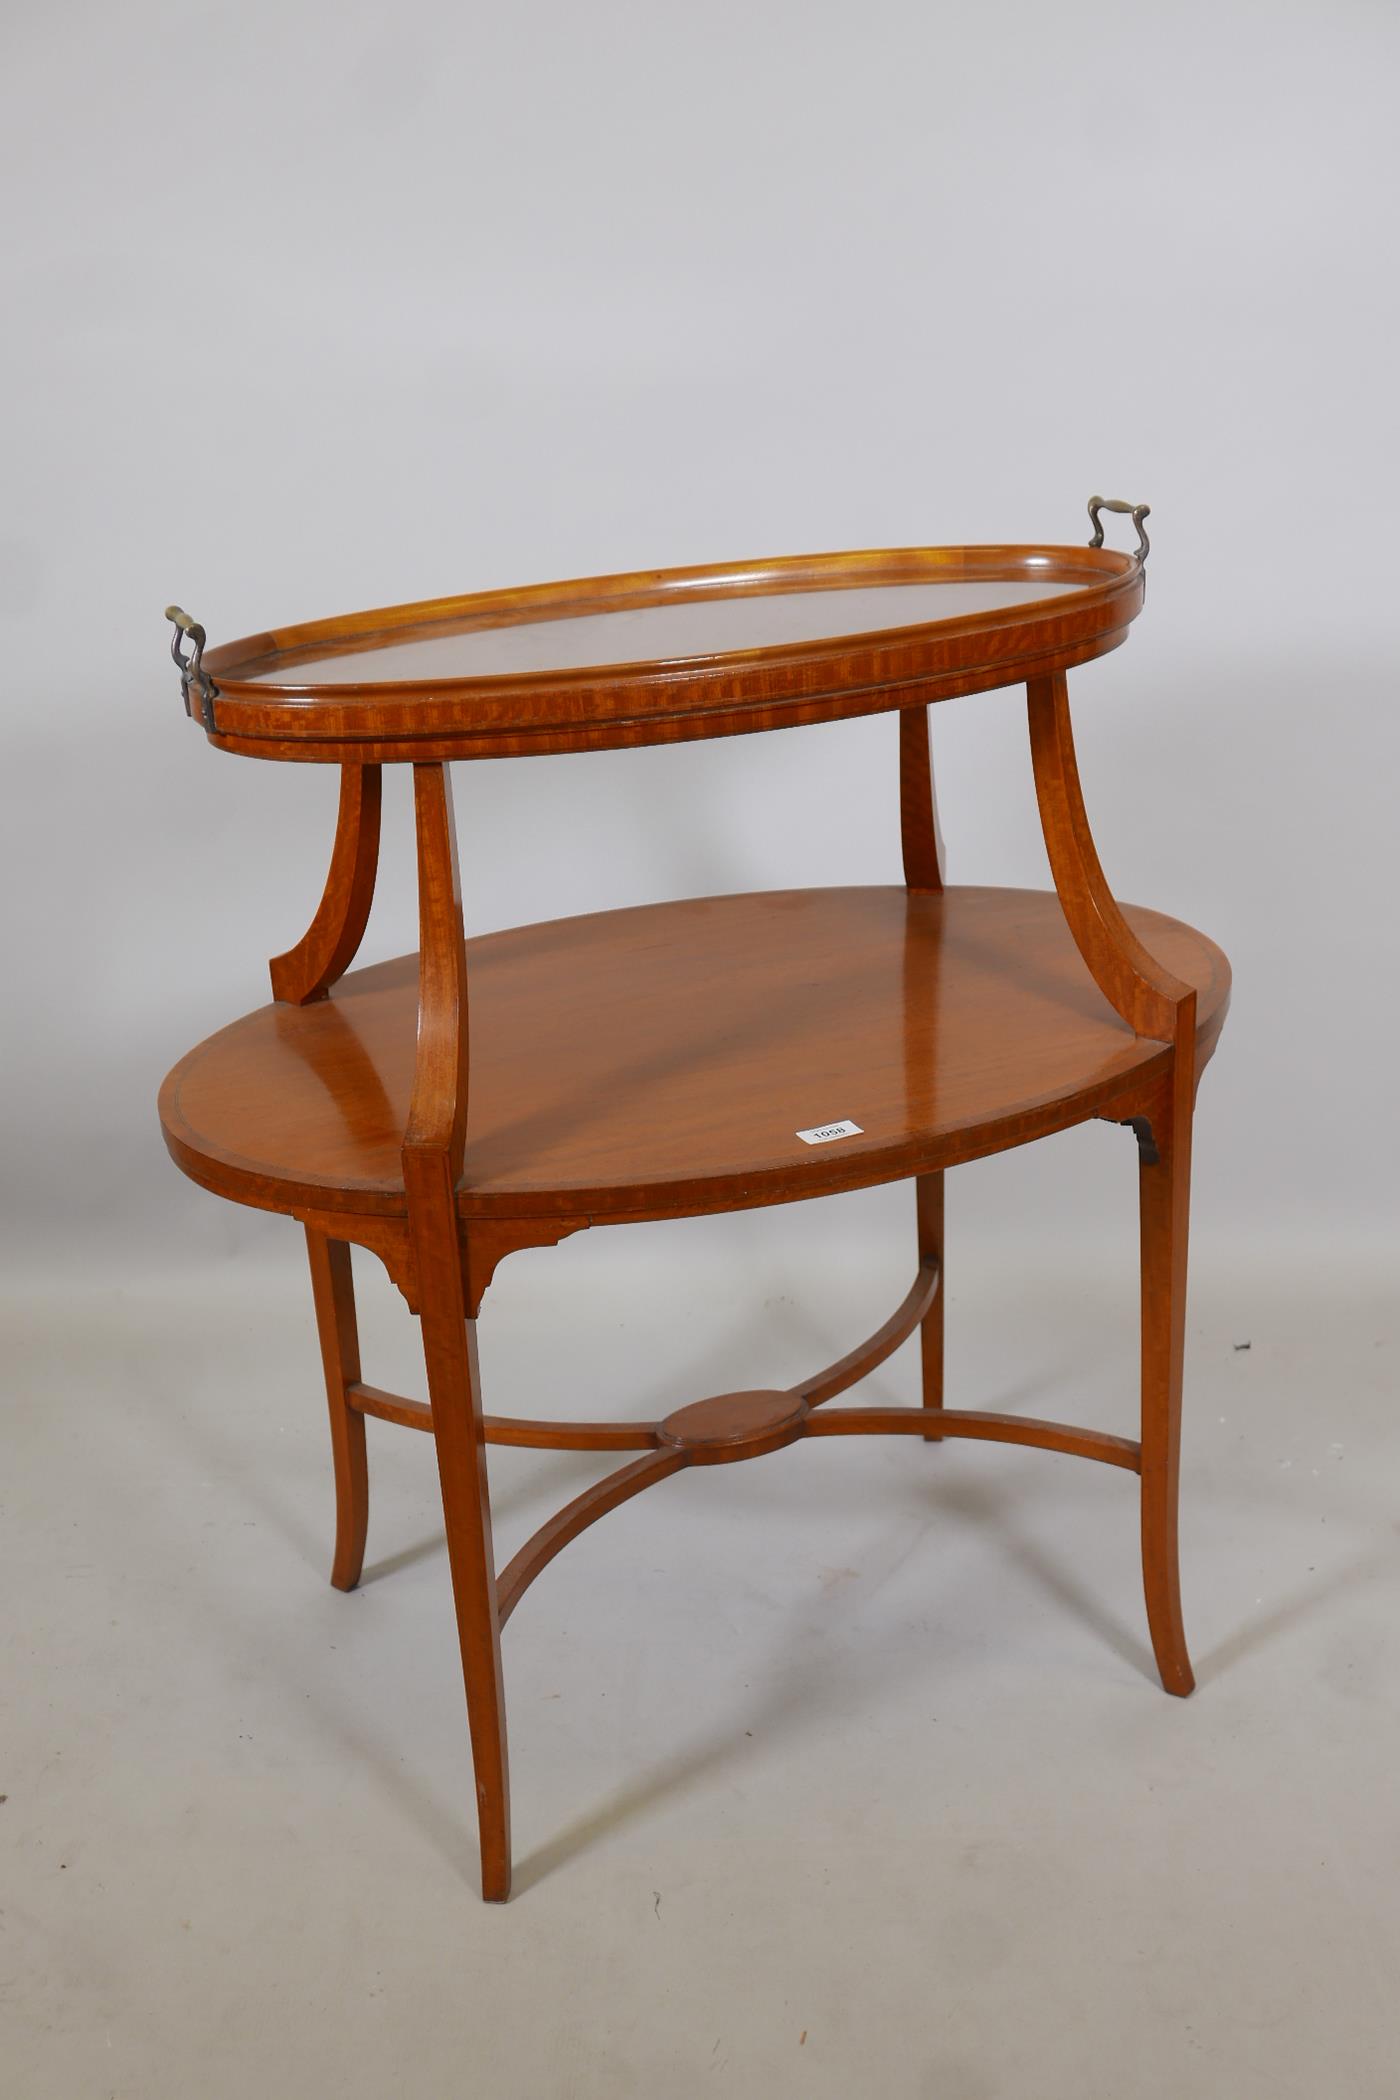 A C19th satinwood two tier etagere, the top with removable glass tray, raised on sabre supports